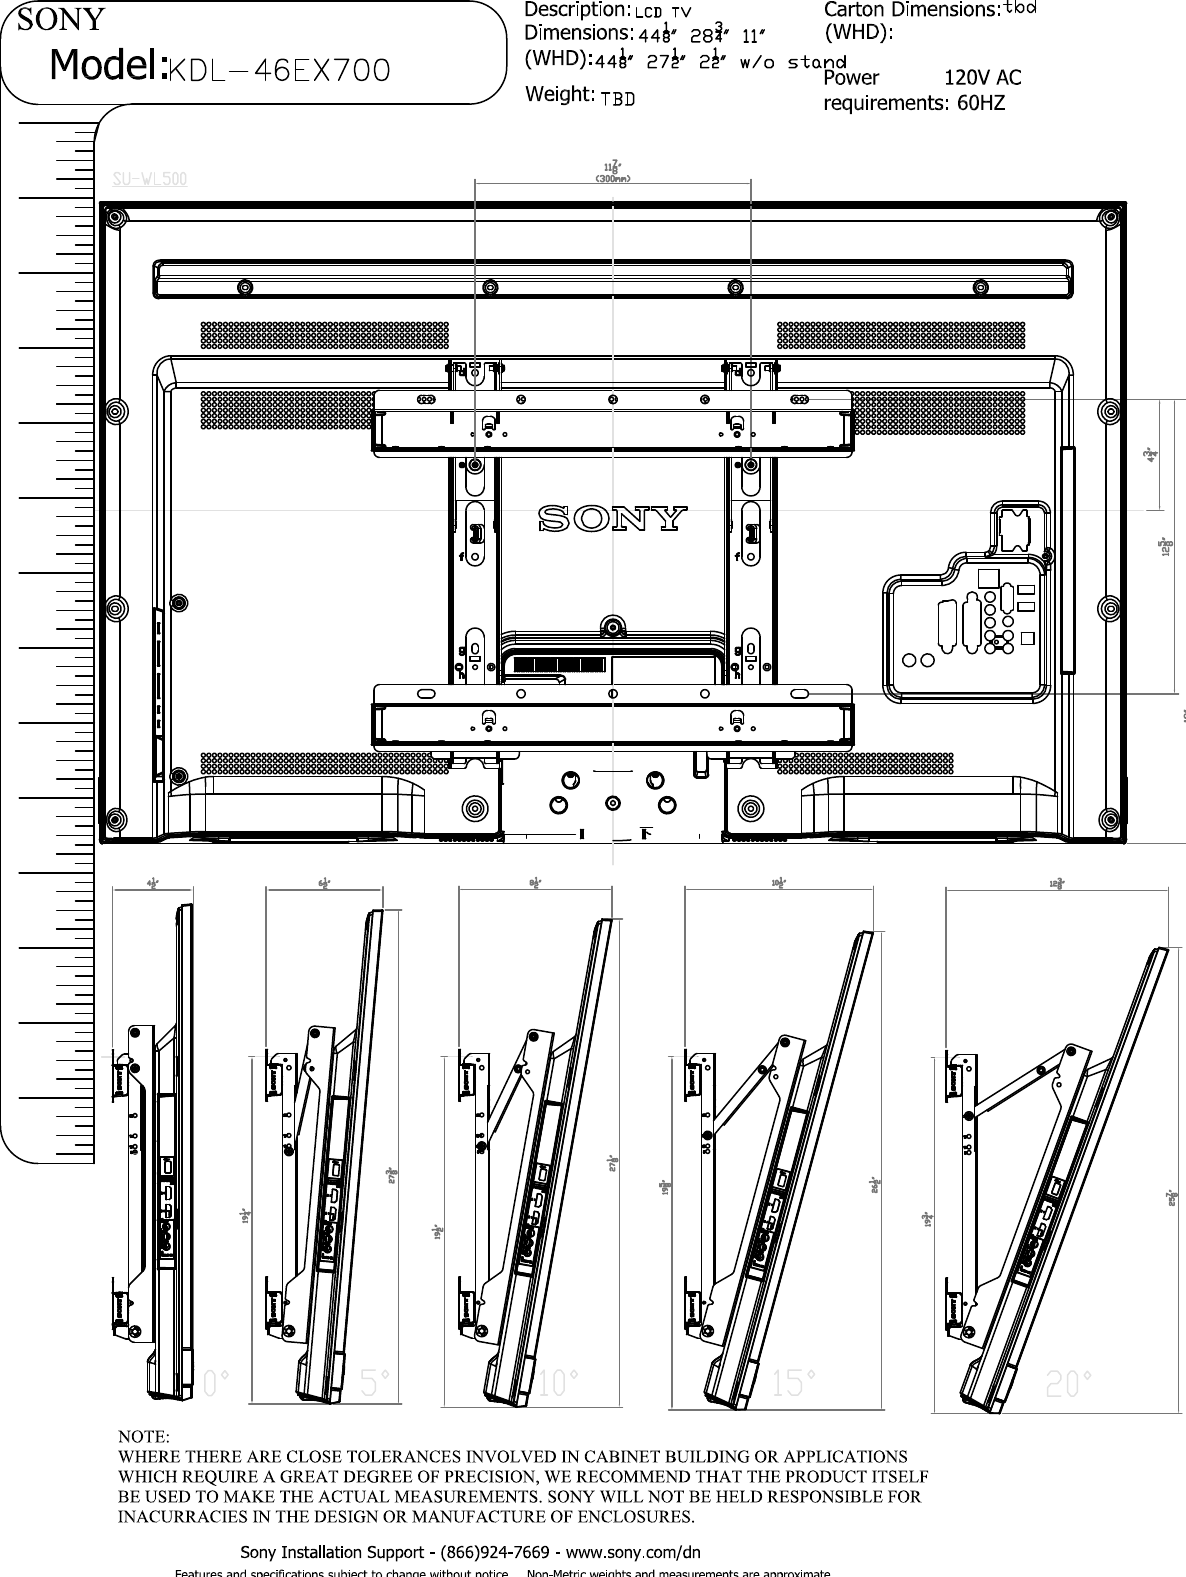 Page 3 of 3 - Sony KDL-46EX700 Layout1  User Manual Dimensions Diagram KDL46EX700 Cutsheet